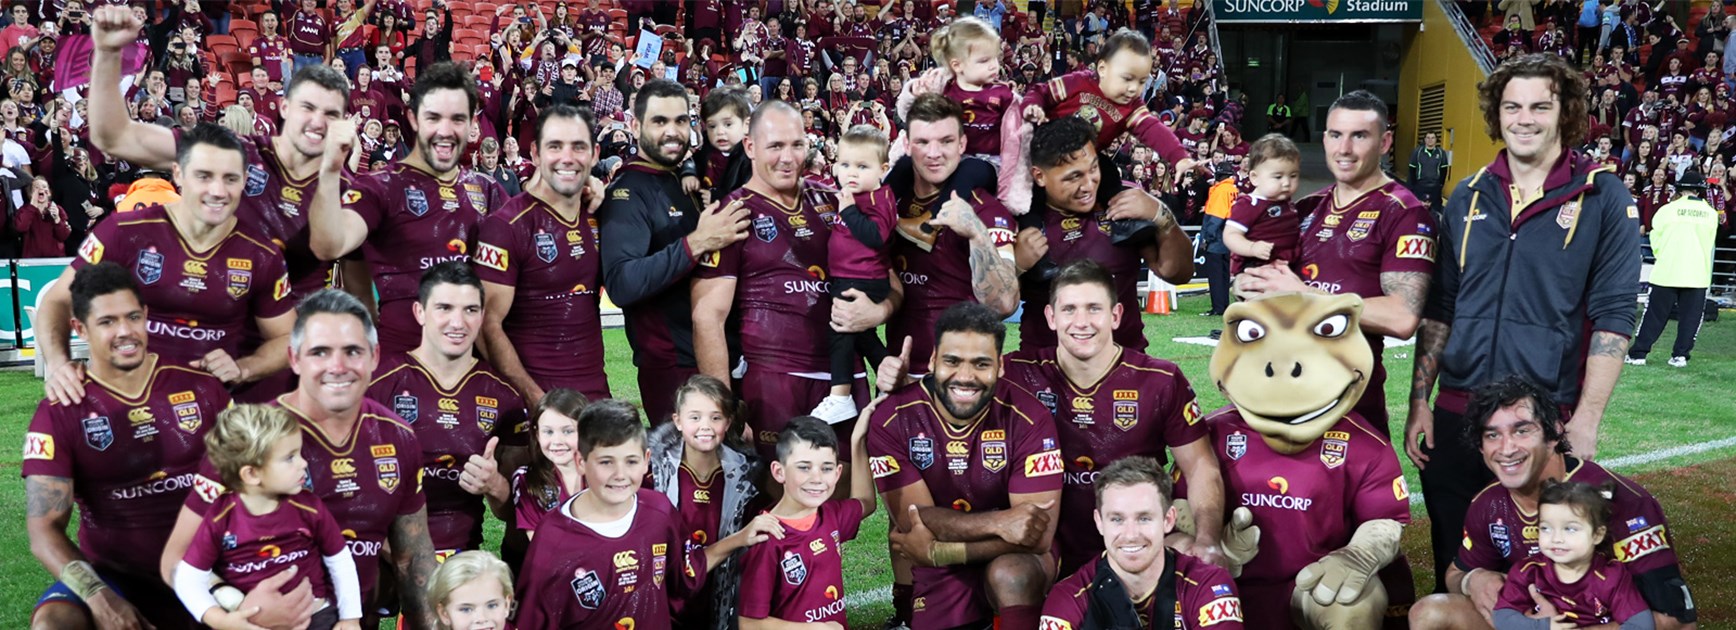 The victorious Queensland team celebrate winning the 2016 State of Origin series.